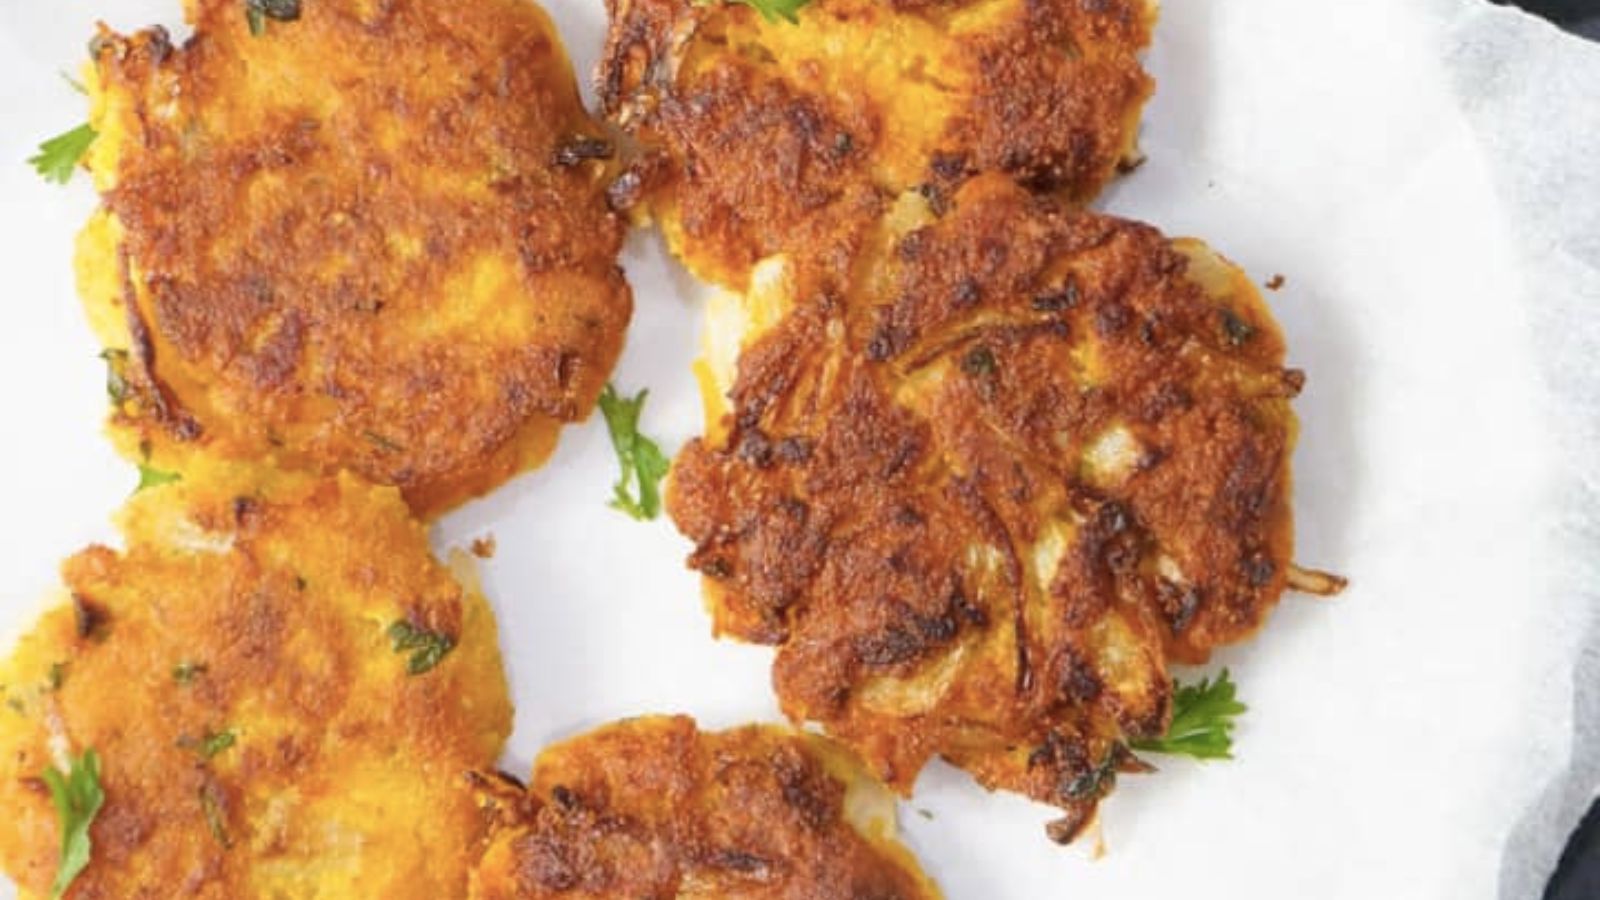 Butternut squash chickpea fritters.
